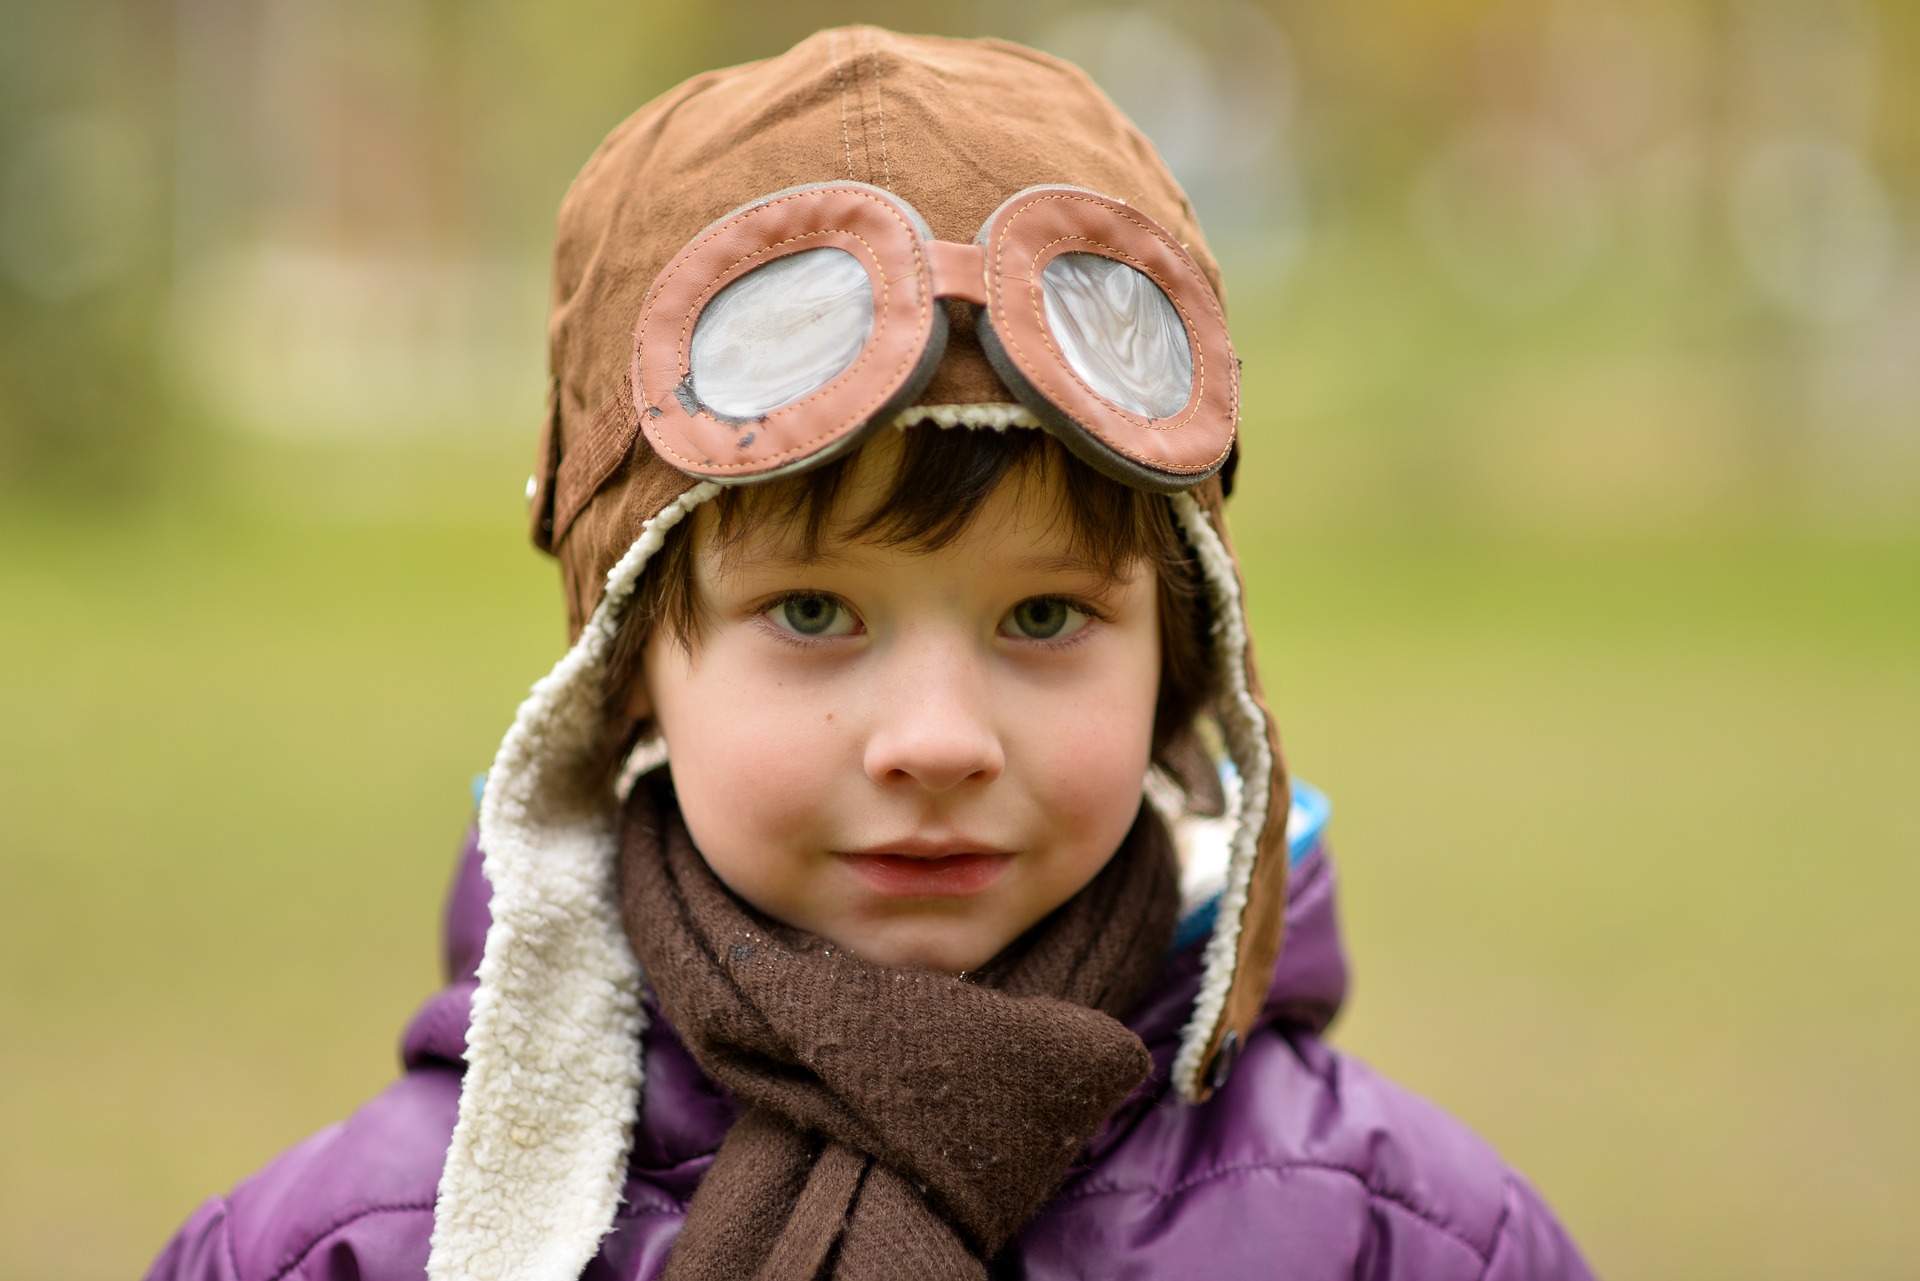 imaginative and confident child wearing a pilot's outfit